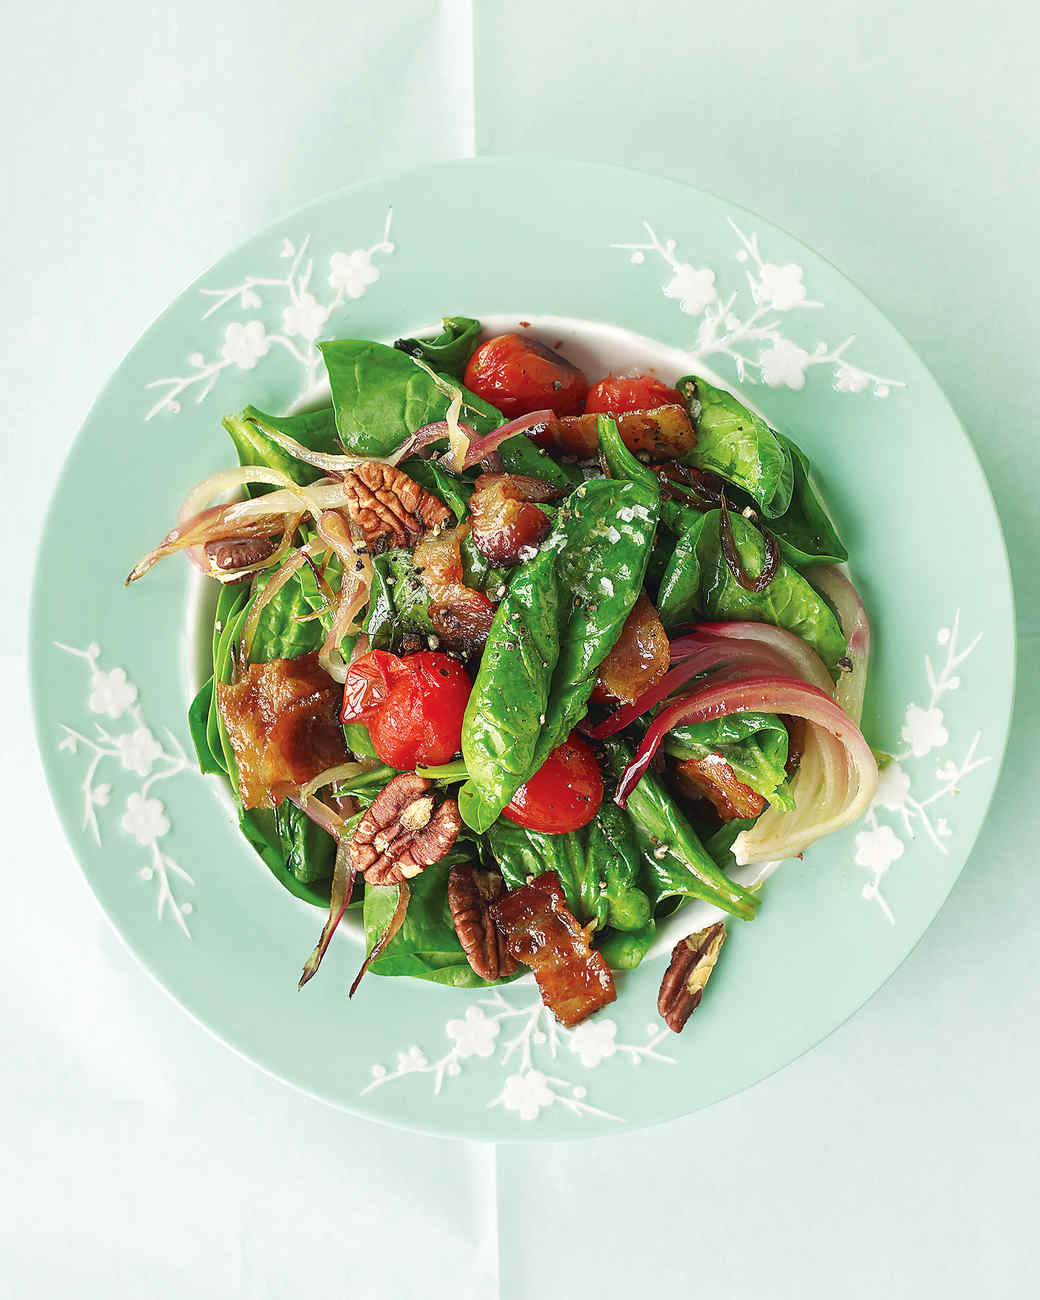 Warm Spinach Salad with Bacon, Tomatoes, and Pecans